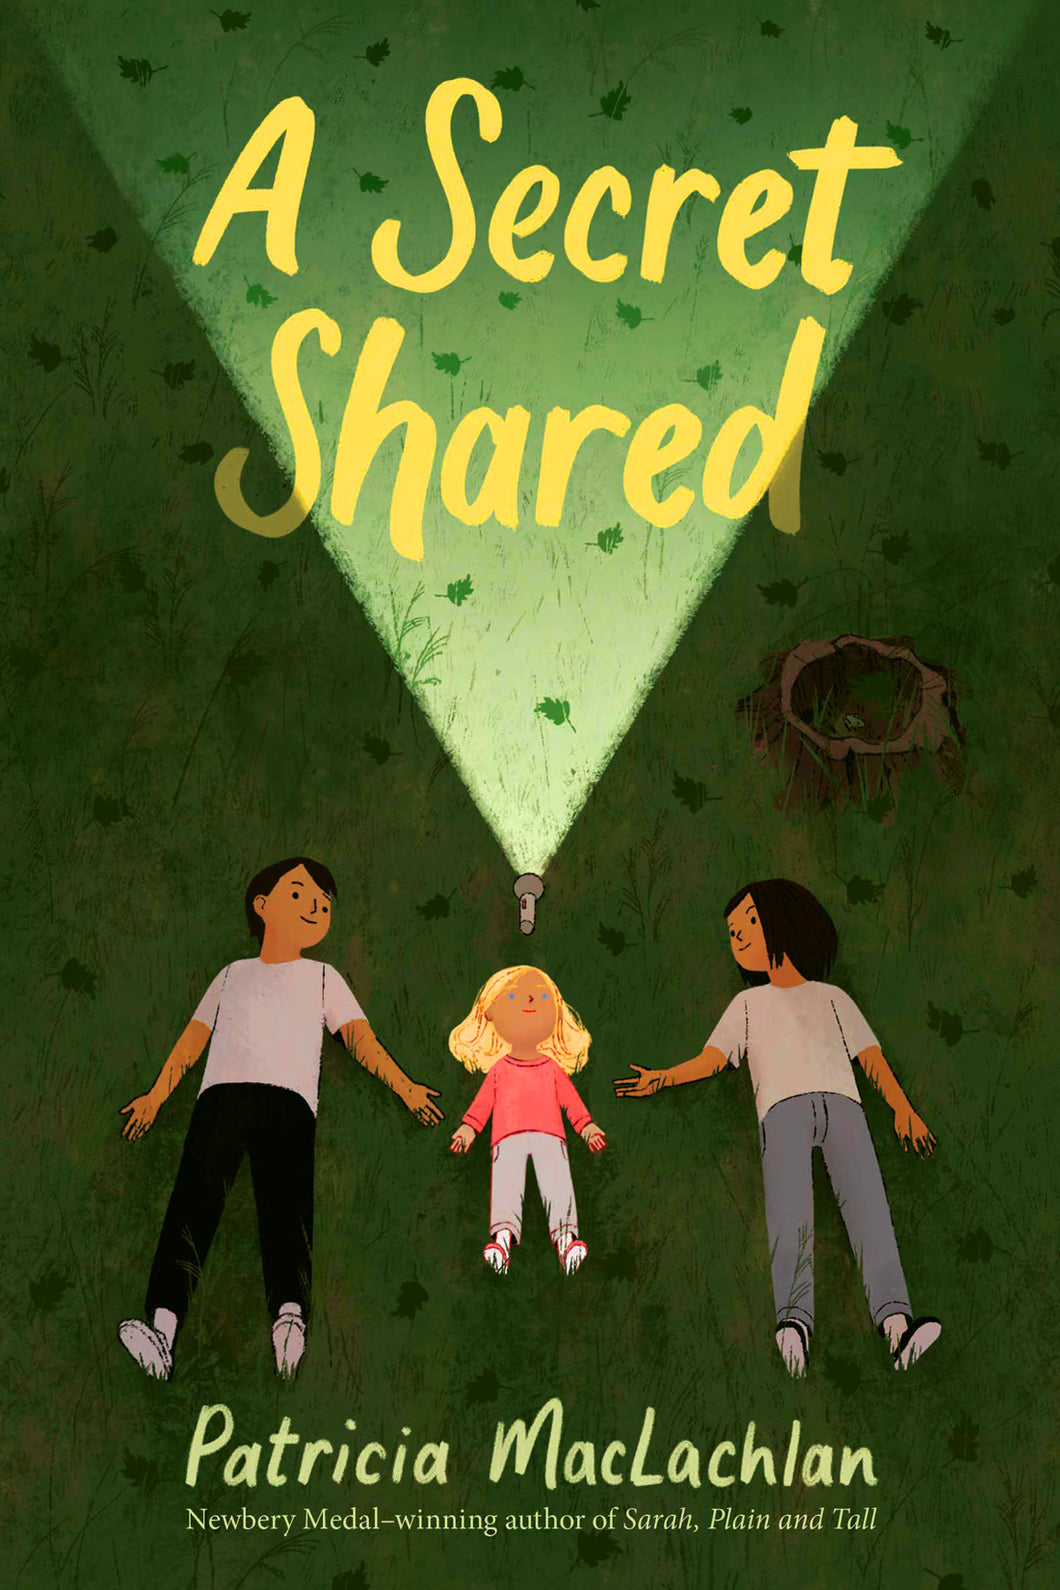 A Secret Shared by Patricia MacLachlan / Hardcover - NEW BOOK